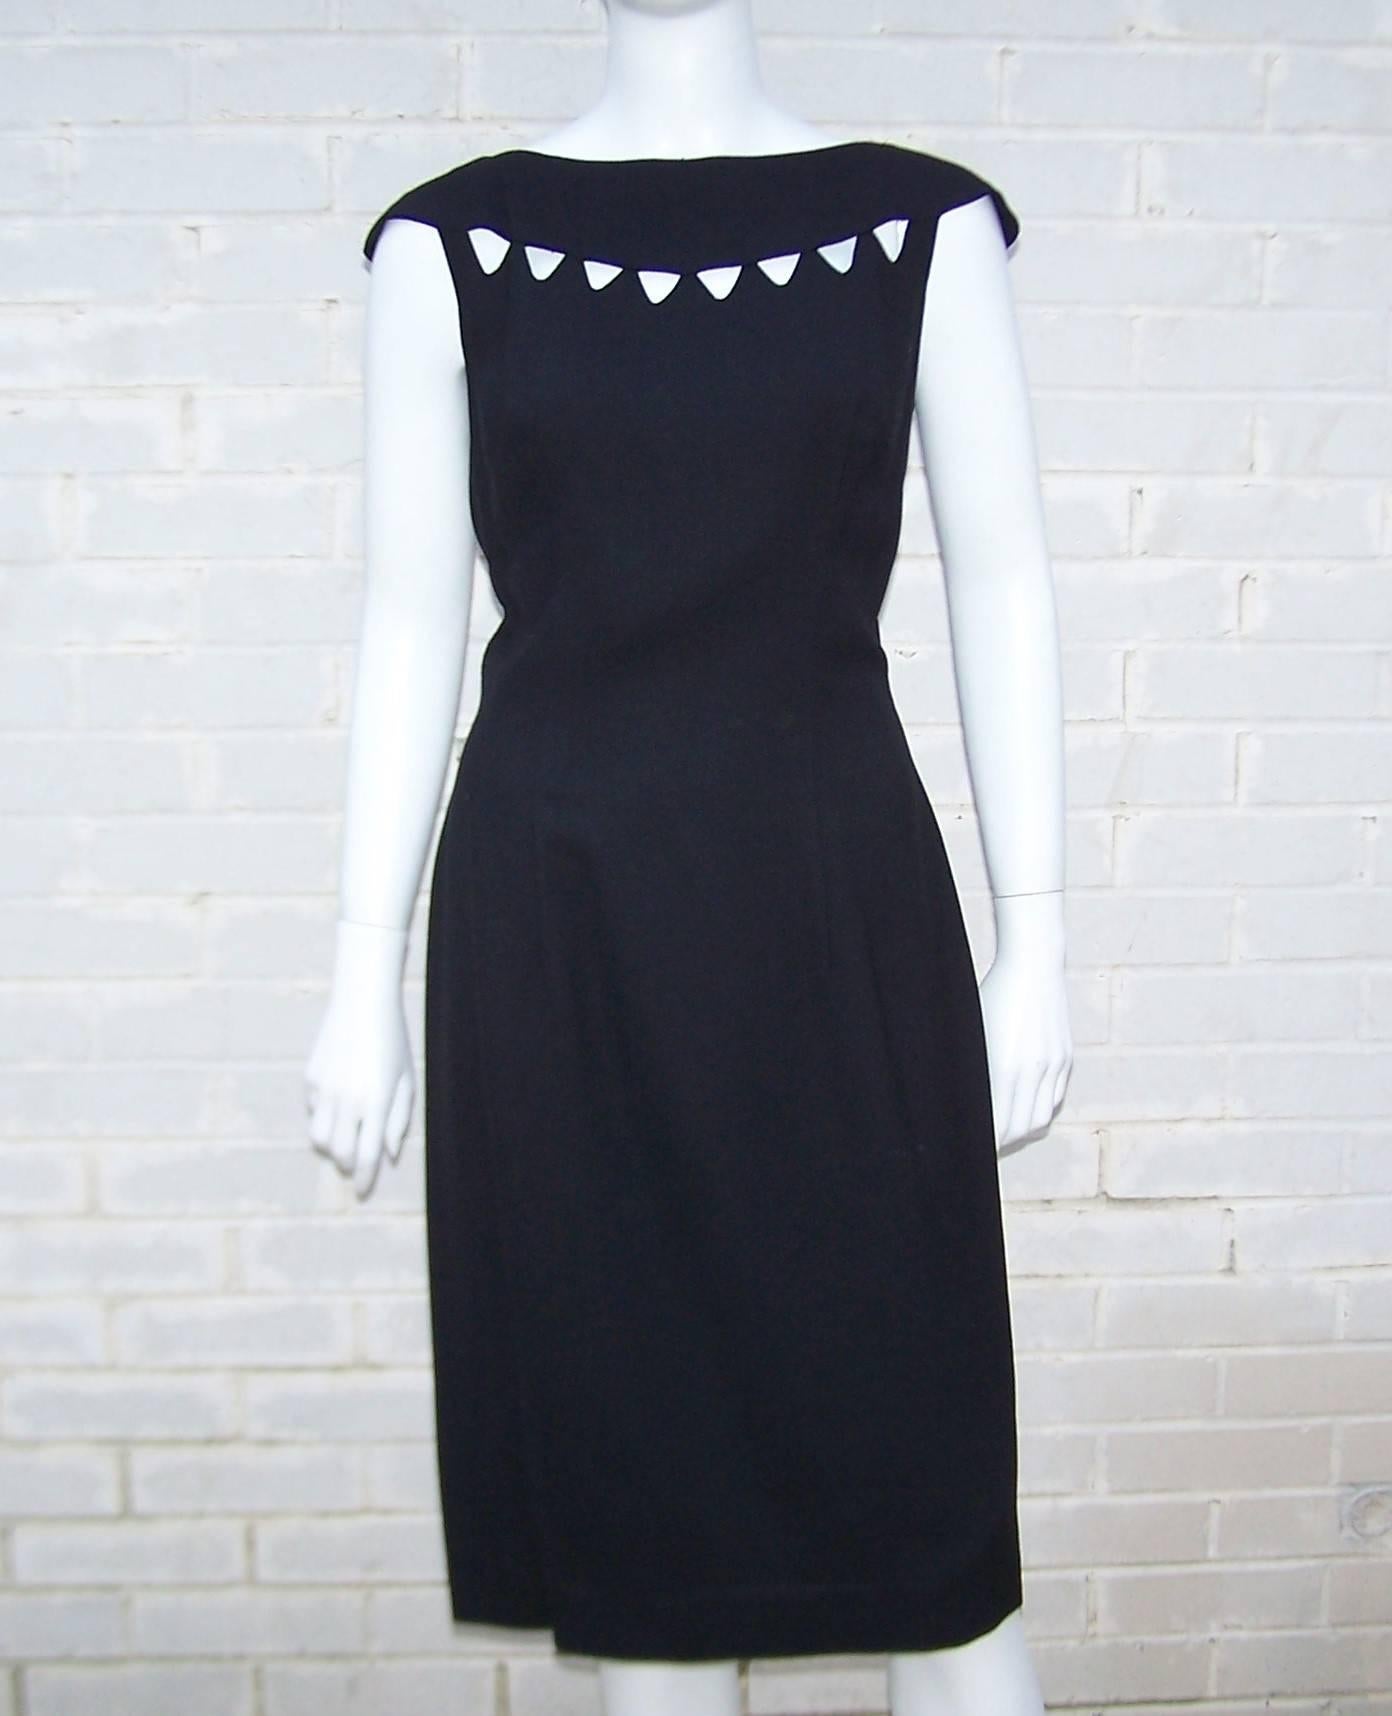 This Al Diamond design inspired by his glamorous wife, Lilli Diamond, is the summertime answer to the 'little black dress'.  The seemingly simple black linen wiggle dress is loaded with details making it anything but simple.  The sleeveless bodice